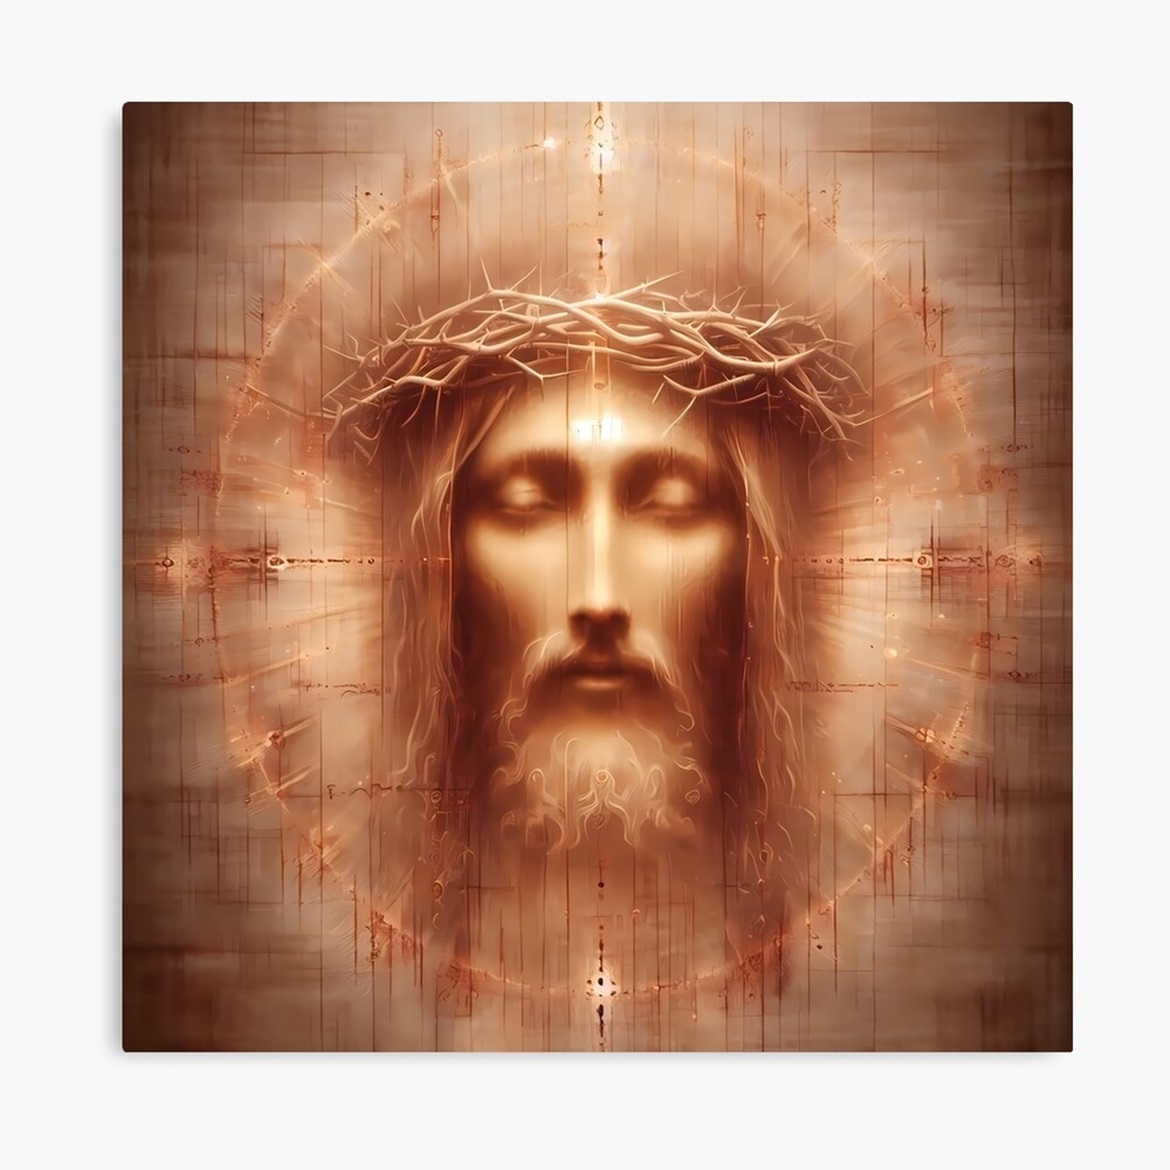 This mesmerizing art piece captures a crown of thorns displayed prominently on Jesus's head against a textured, rustic background resembling The Shroud of Turin. 